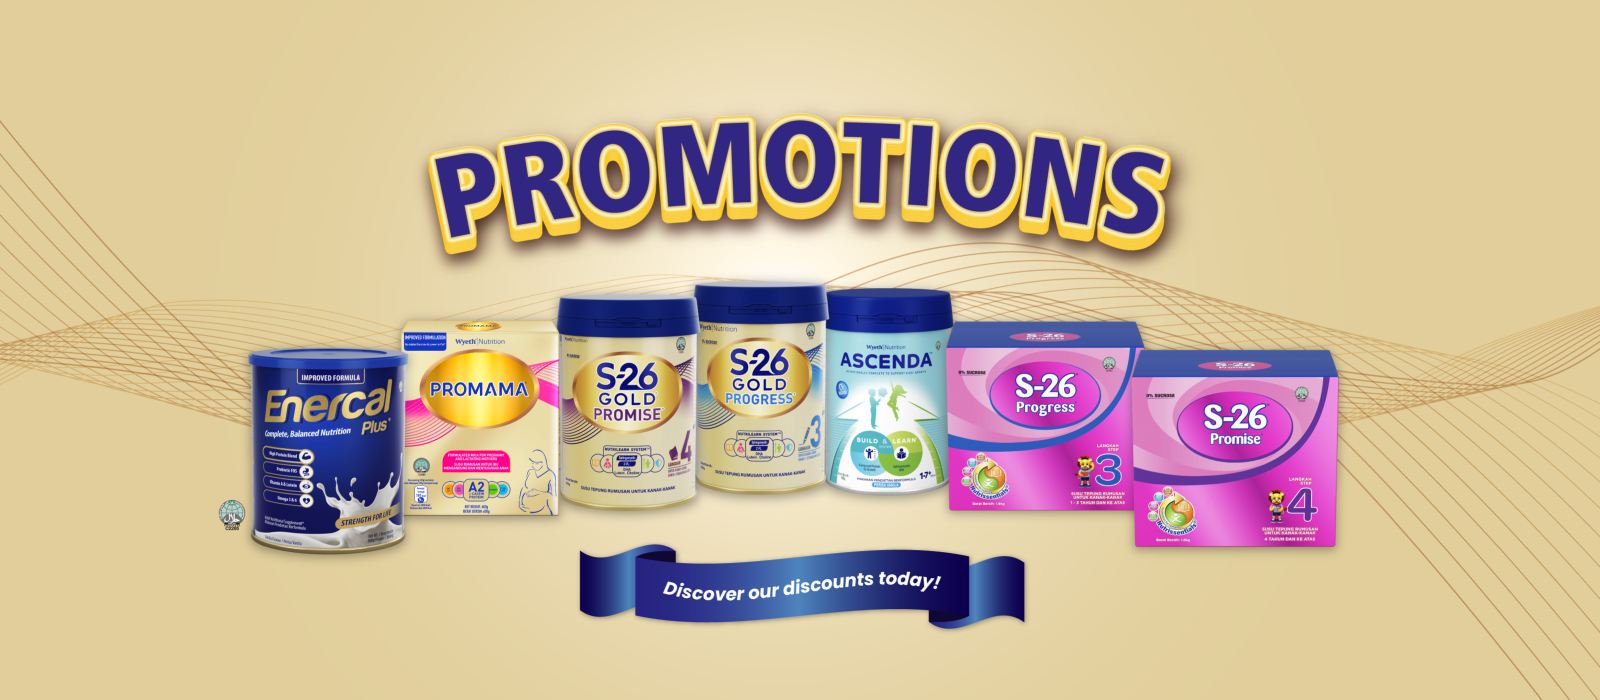 promotions-banner-web-1600x700